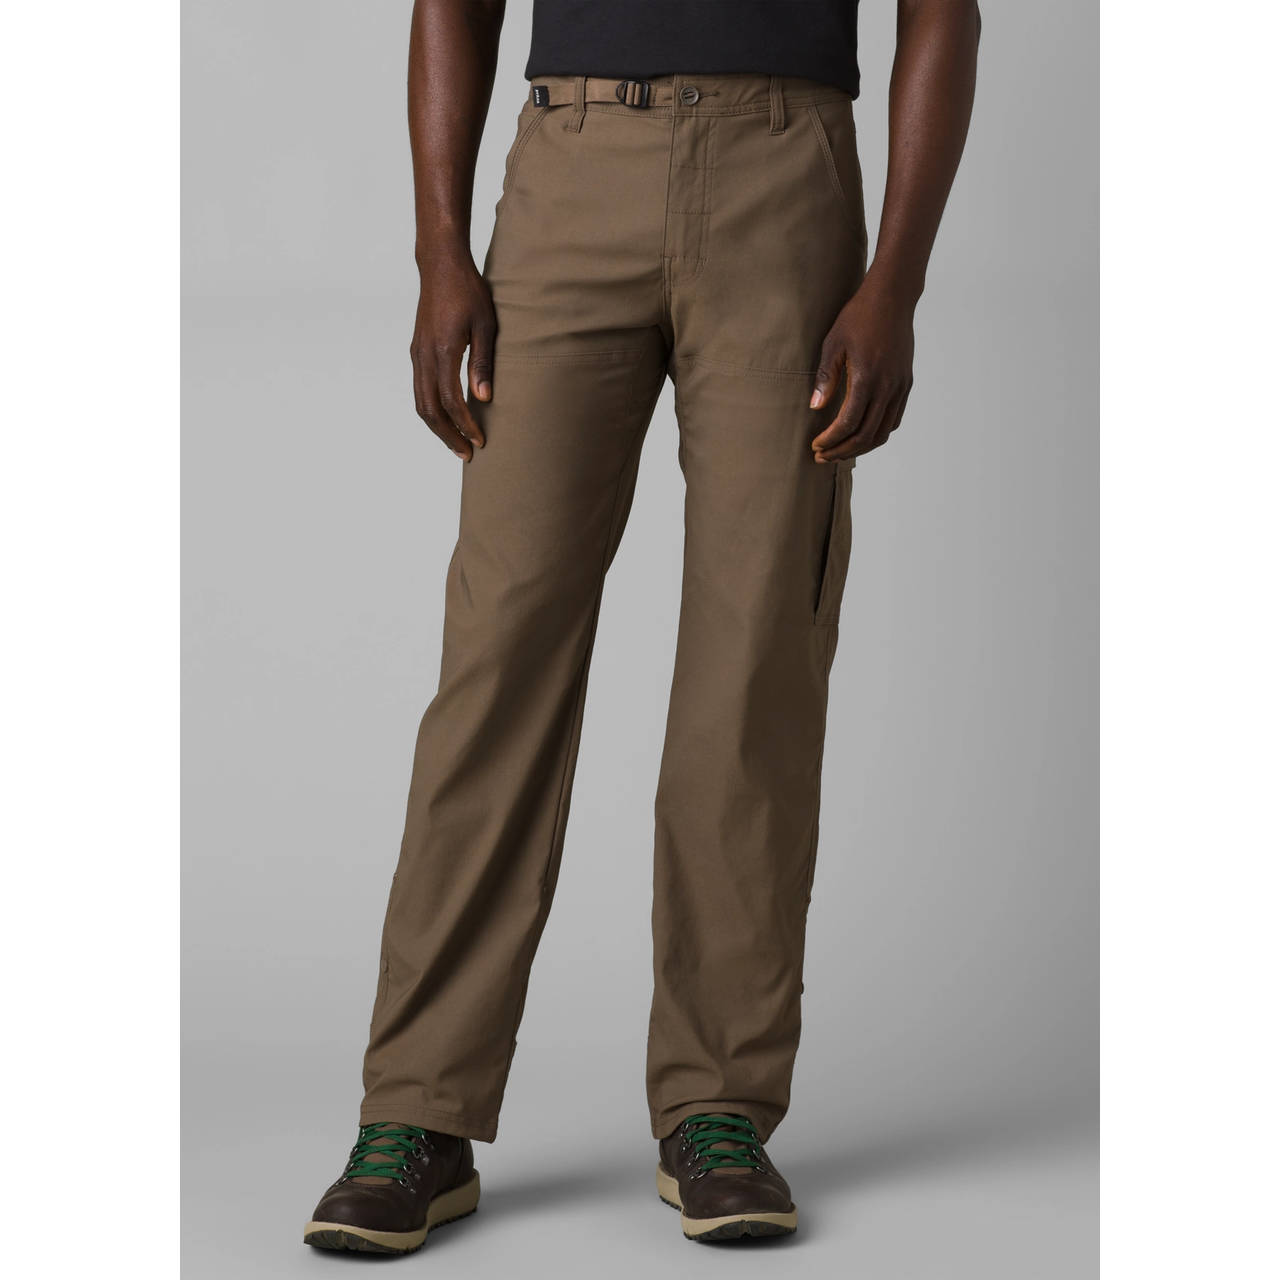 Stretch Zion™ Straight Pant